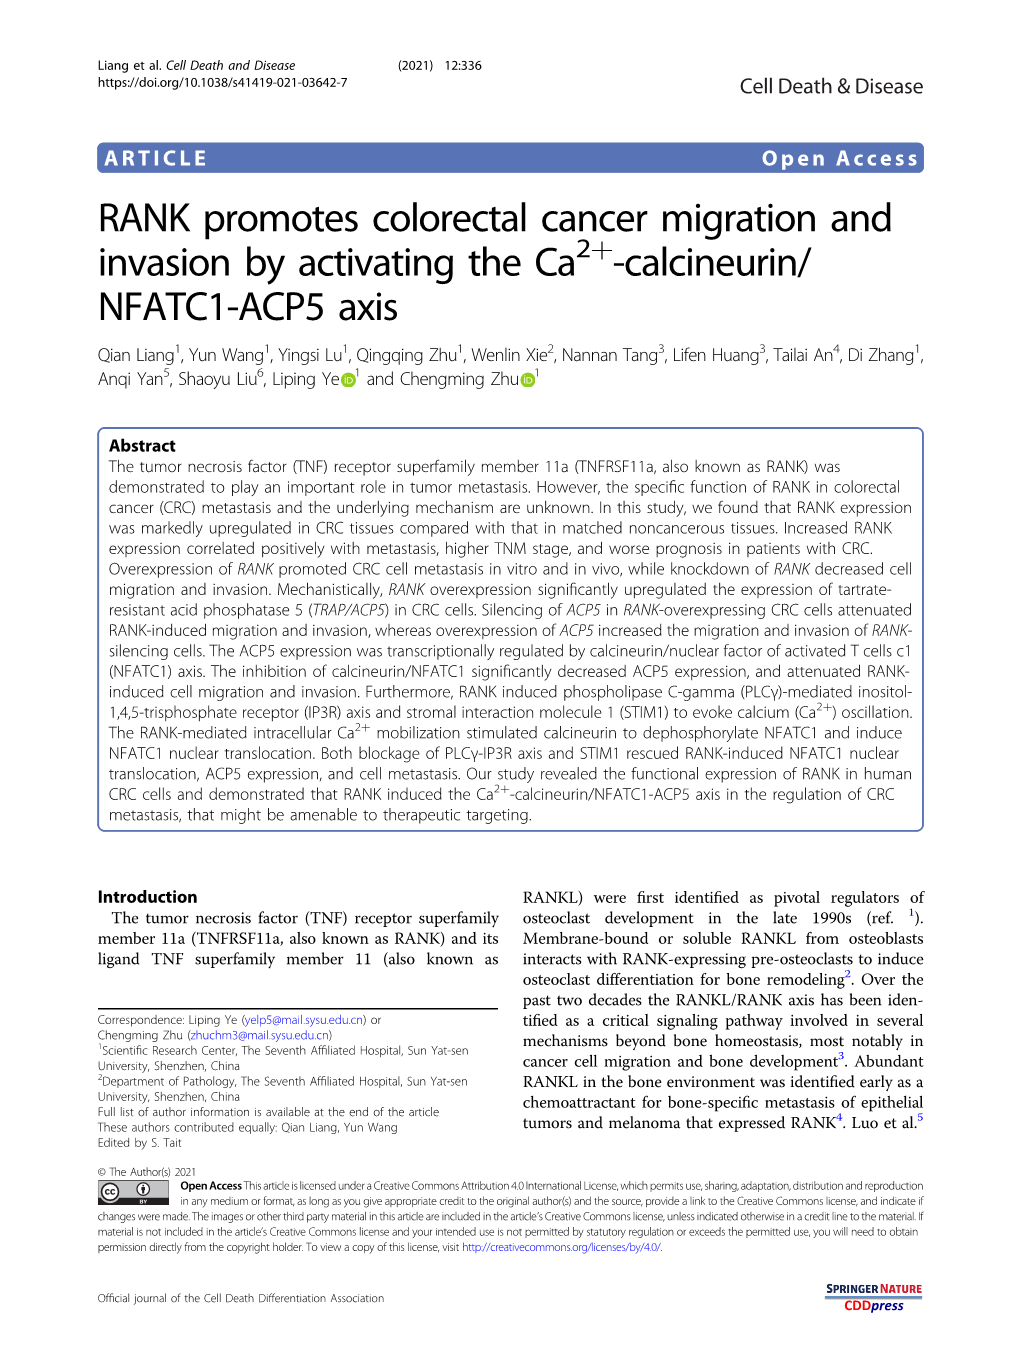 RANK Promotes Colorectal Cancer Migration and Invasion by Activating